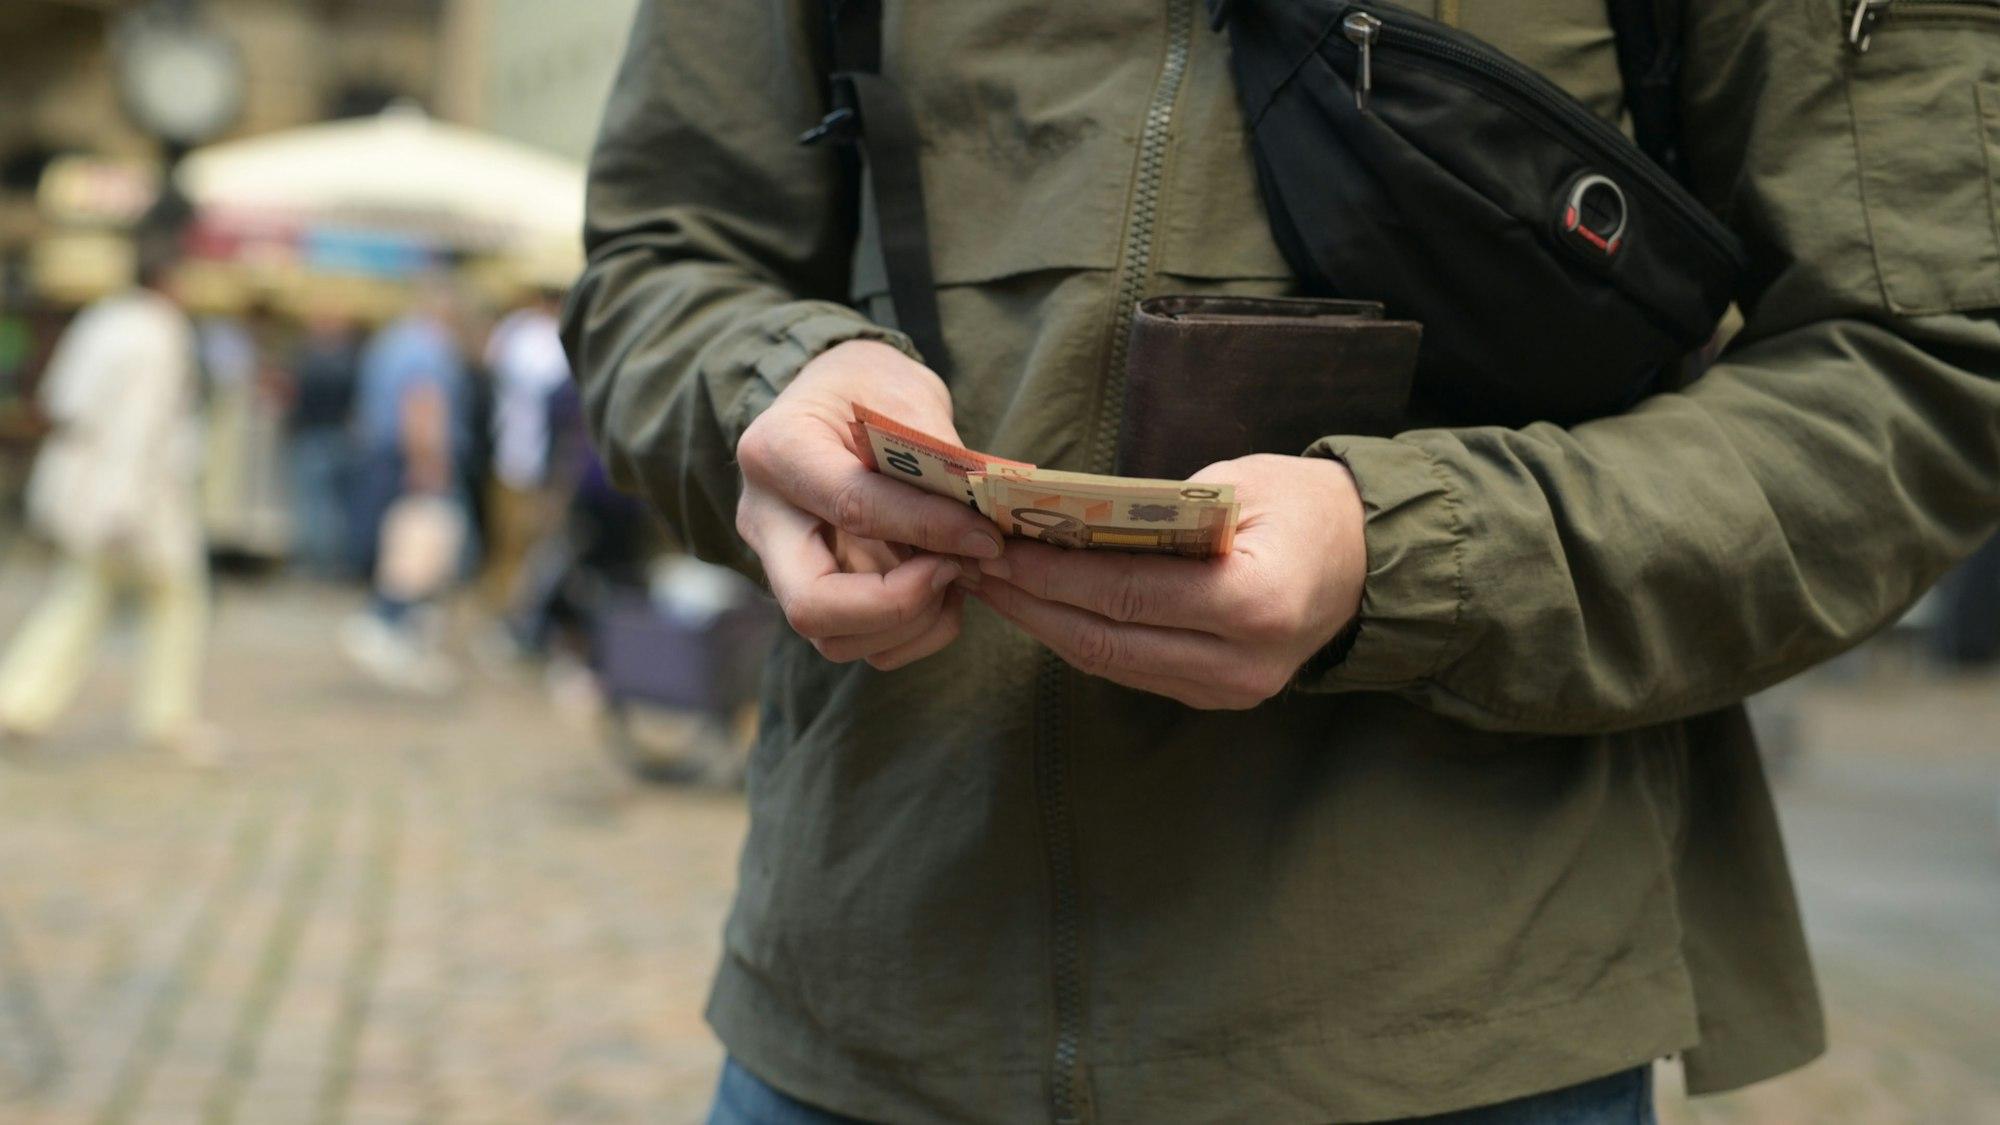 Man On Street Pulls Out Euro From Wallet